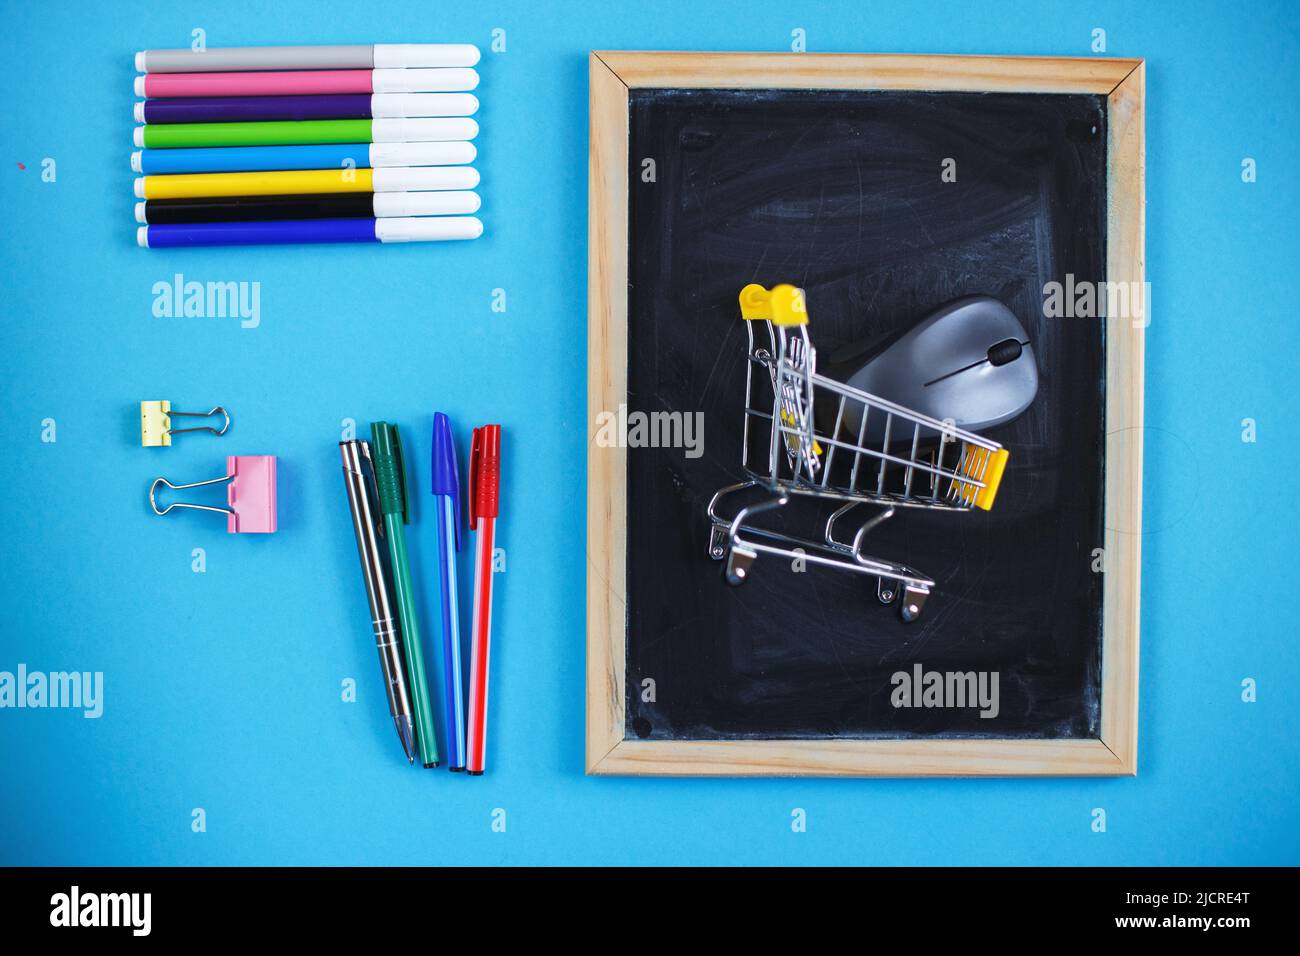 School chalkboard and stationery accessories, pencils and pens with a shopping cart. Back to school concept, top view, blue background Stock Photo